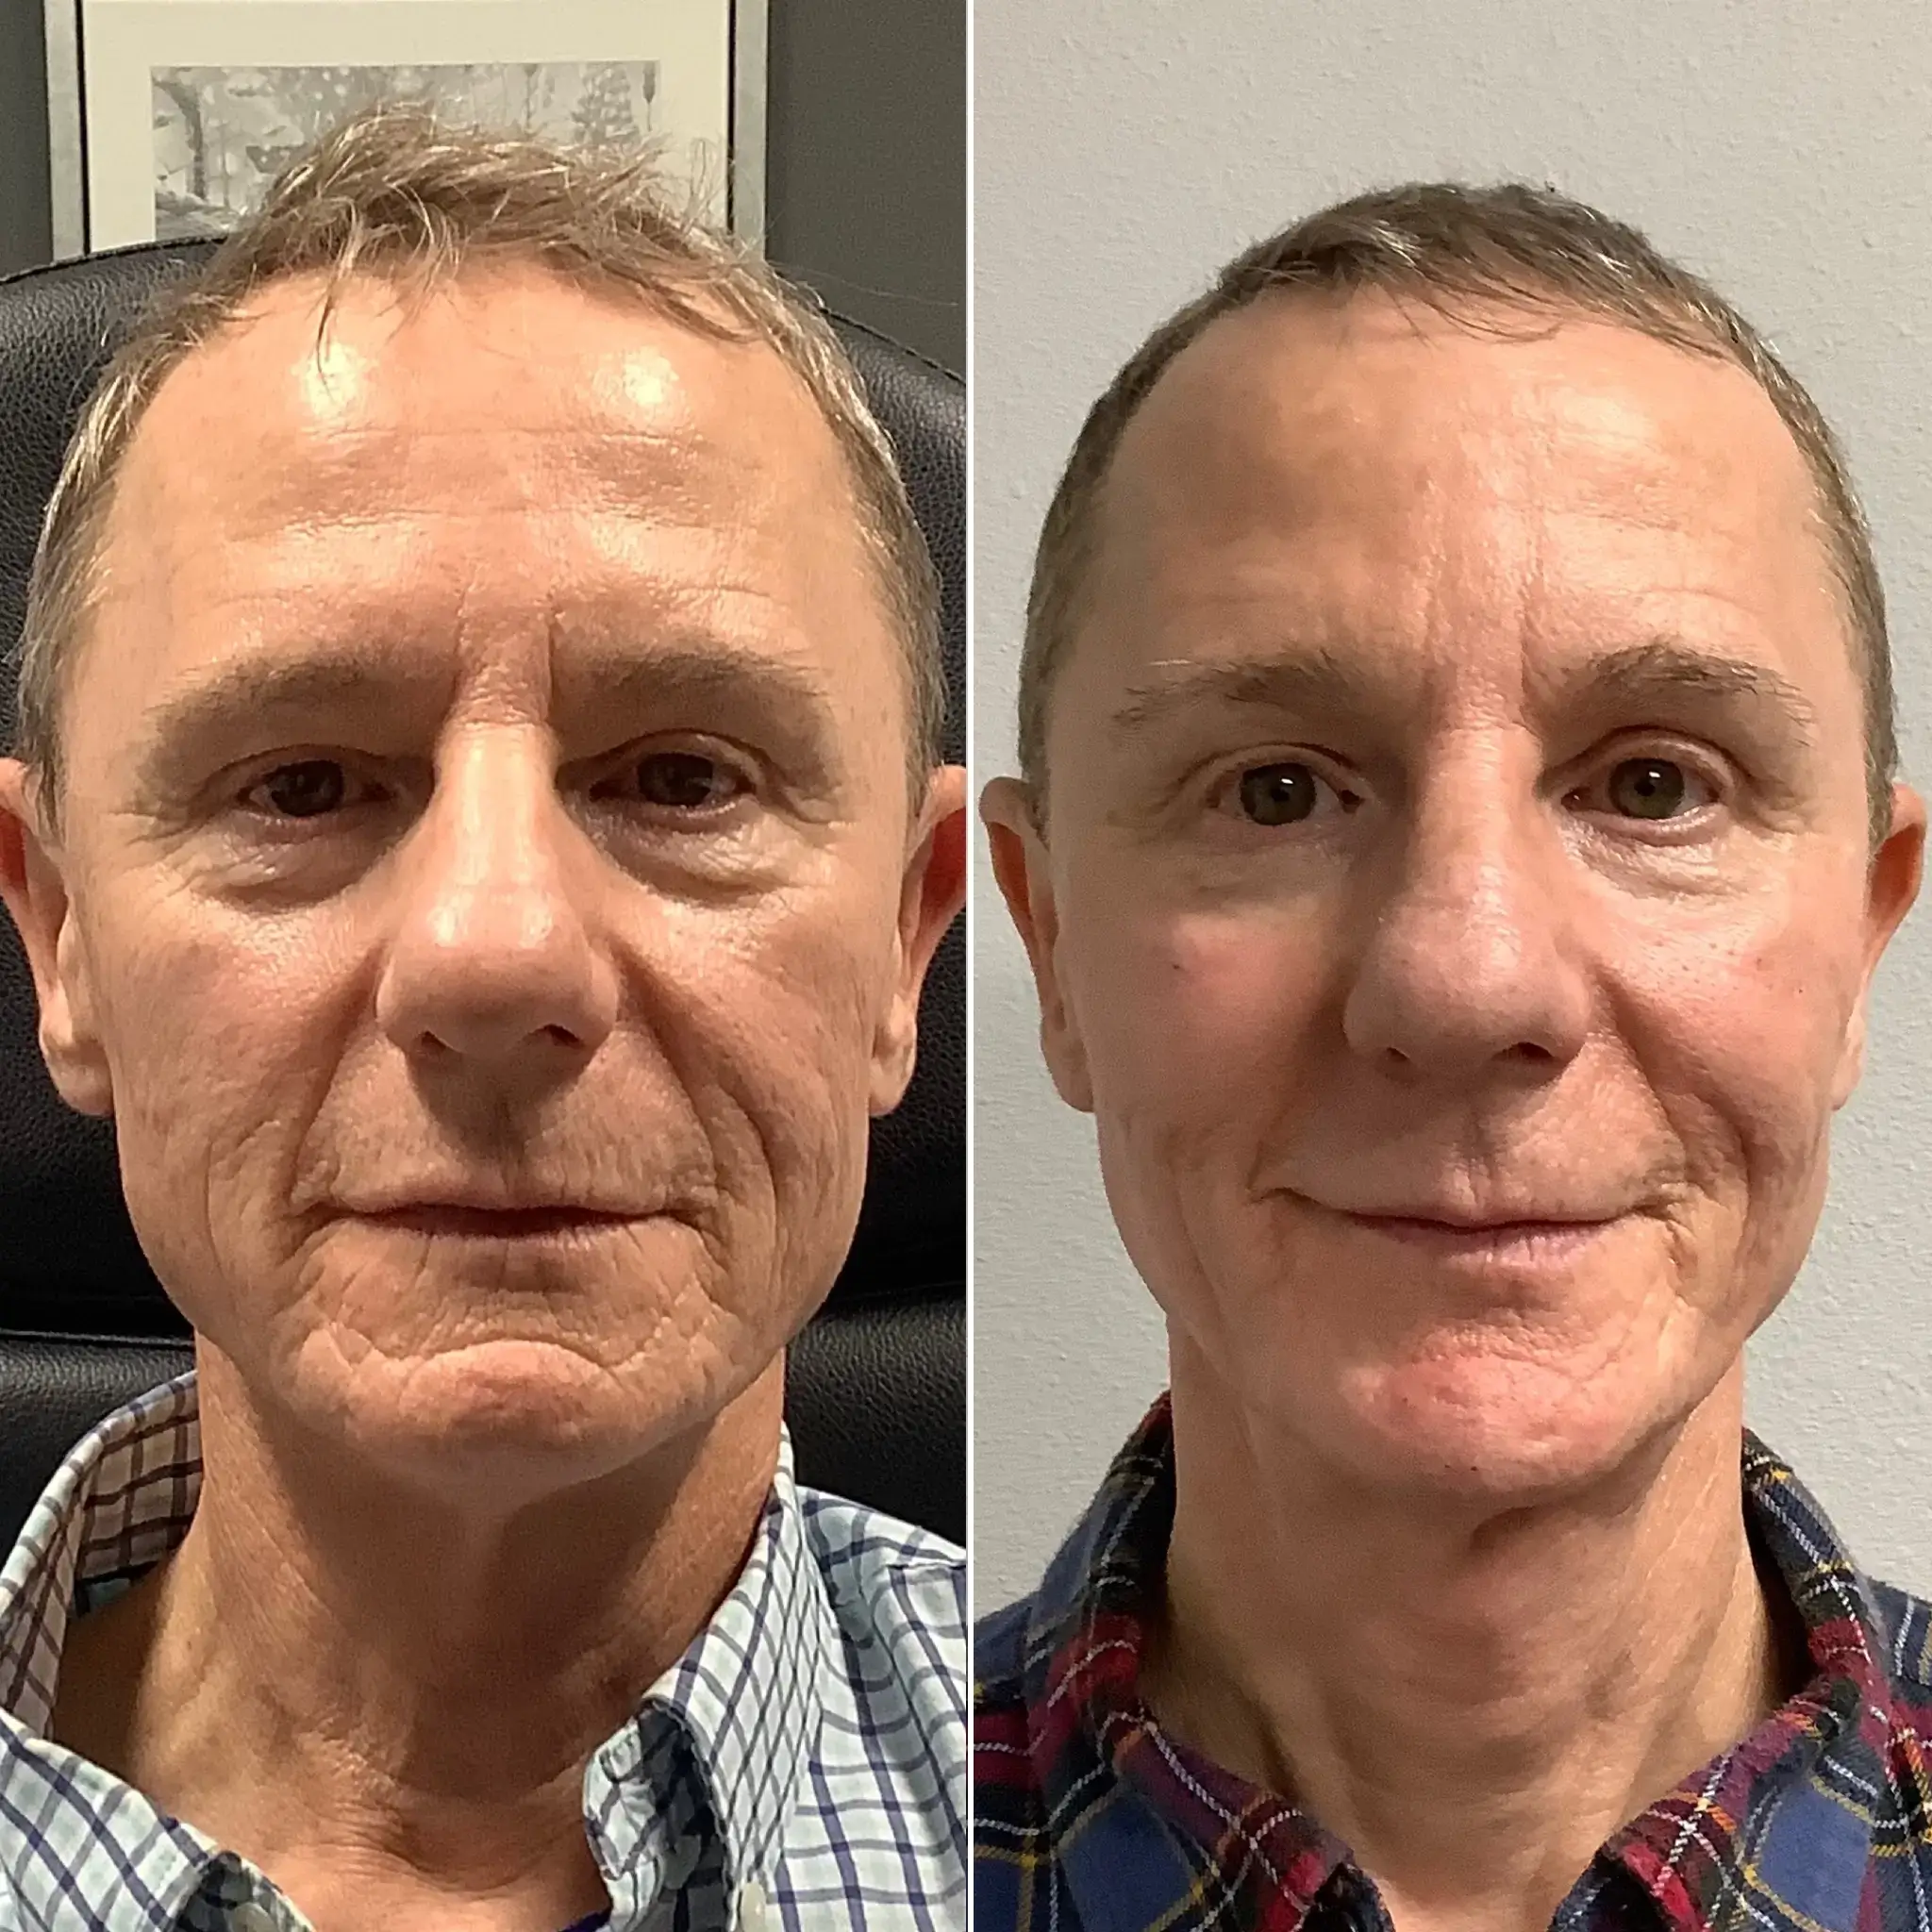 Before and after photos of a man after an anti-aging treatment at a Larkspur Med Spa